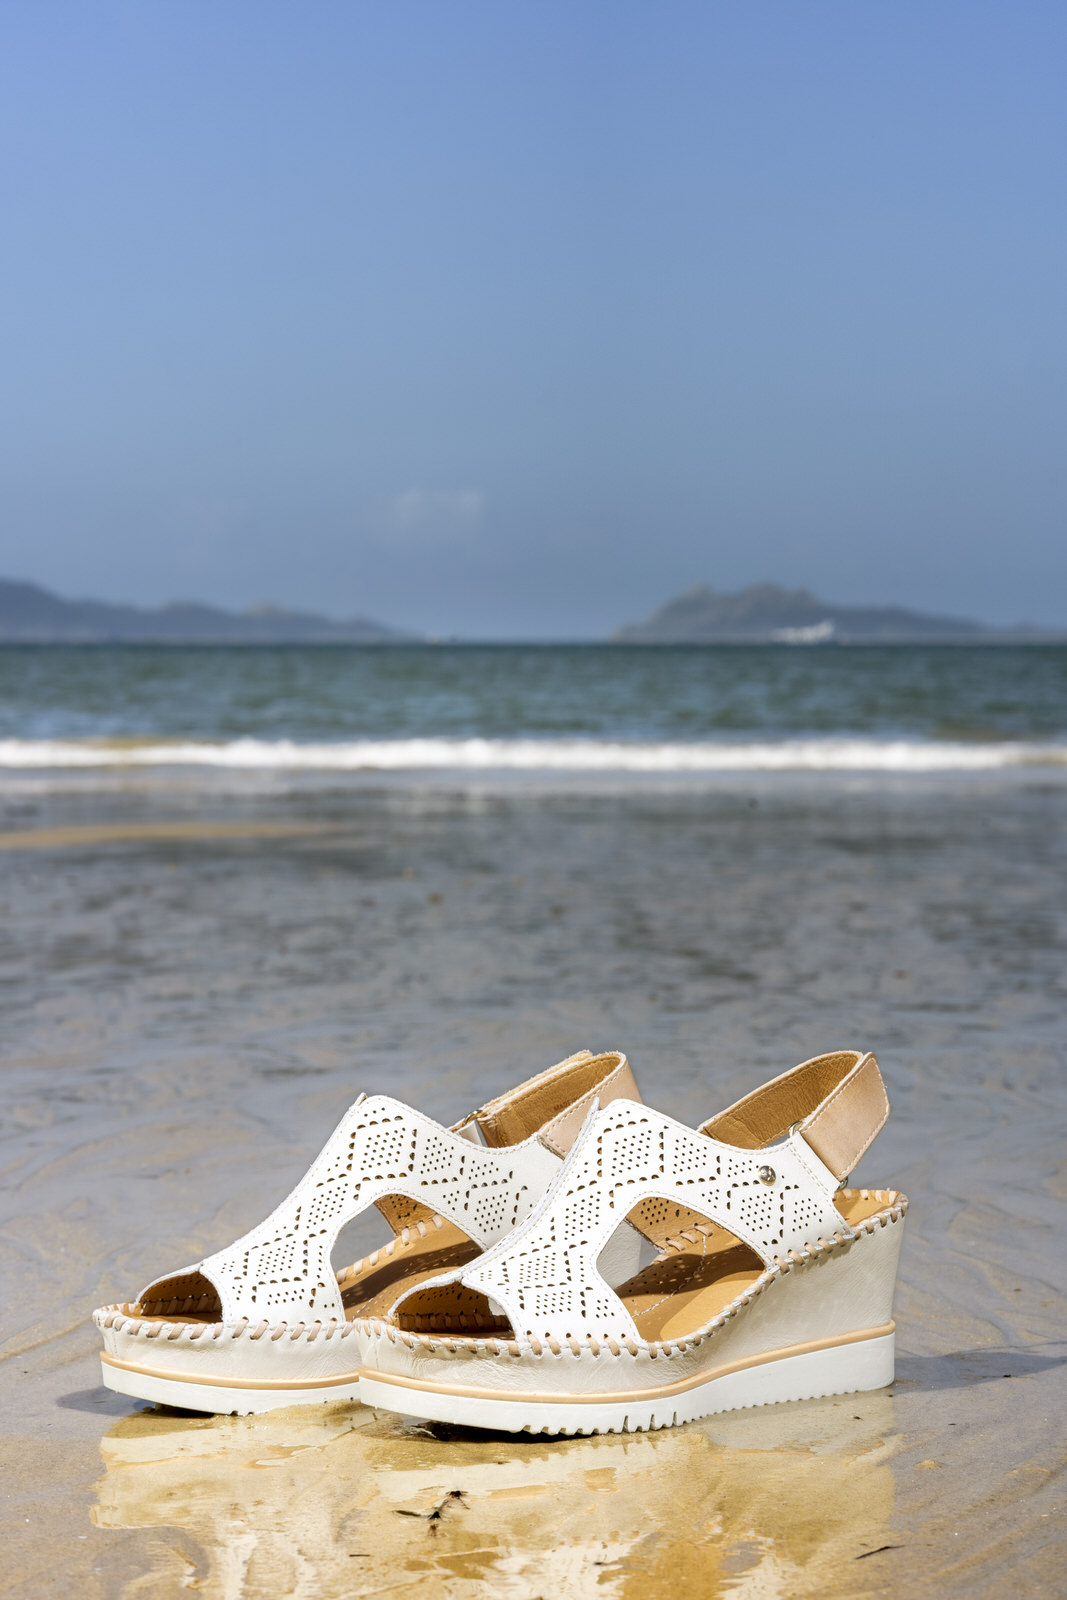 Image of a pair of women's Pikolinos sandals on a rock on the beach